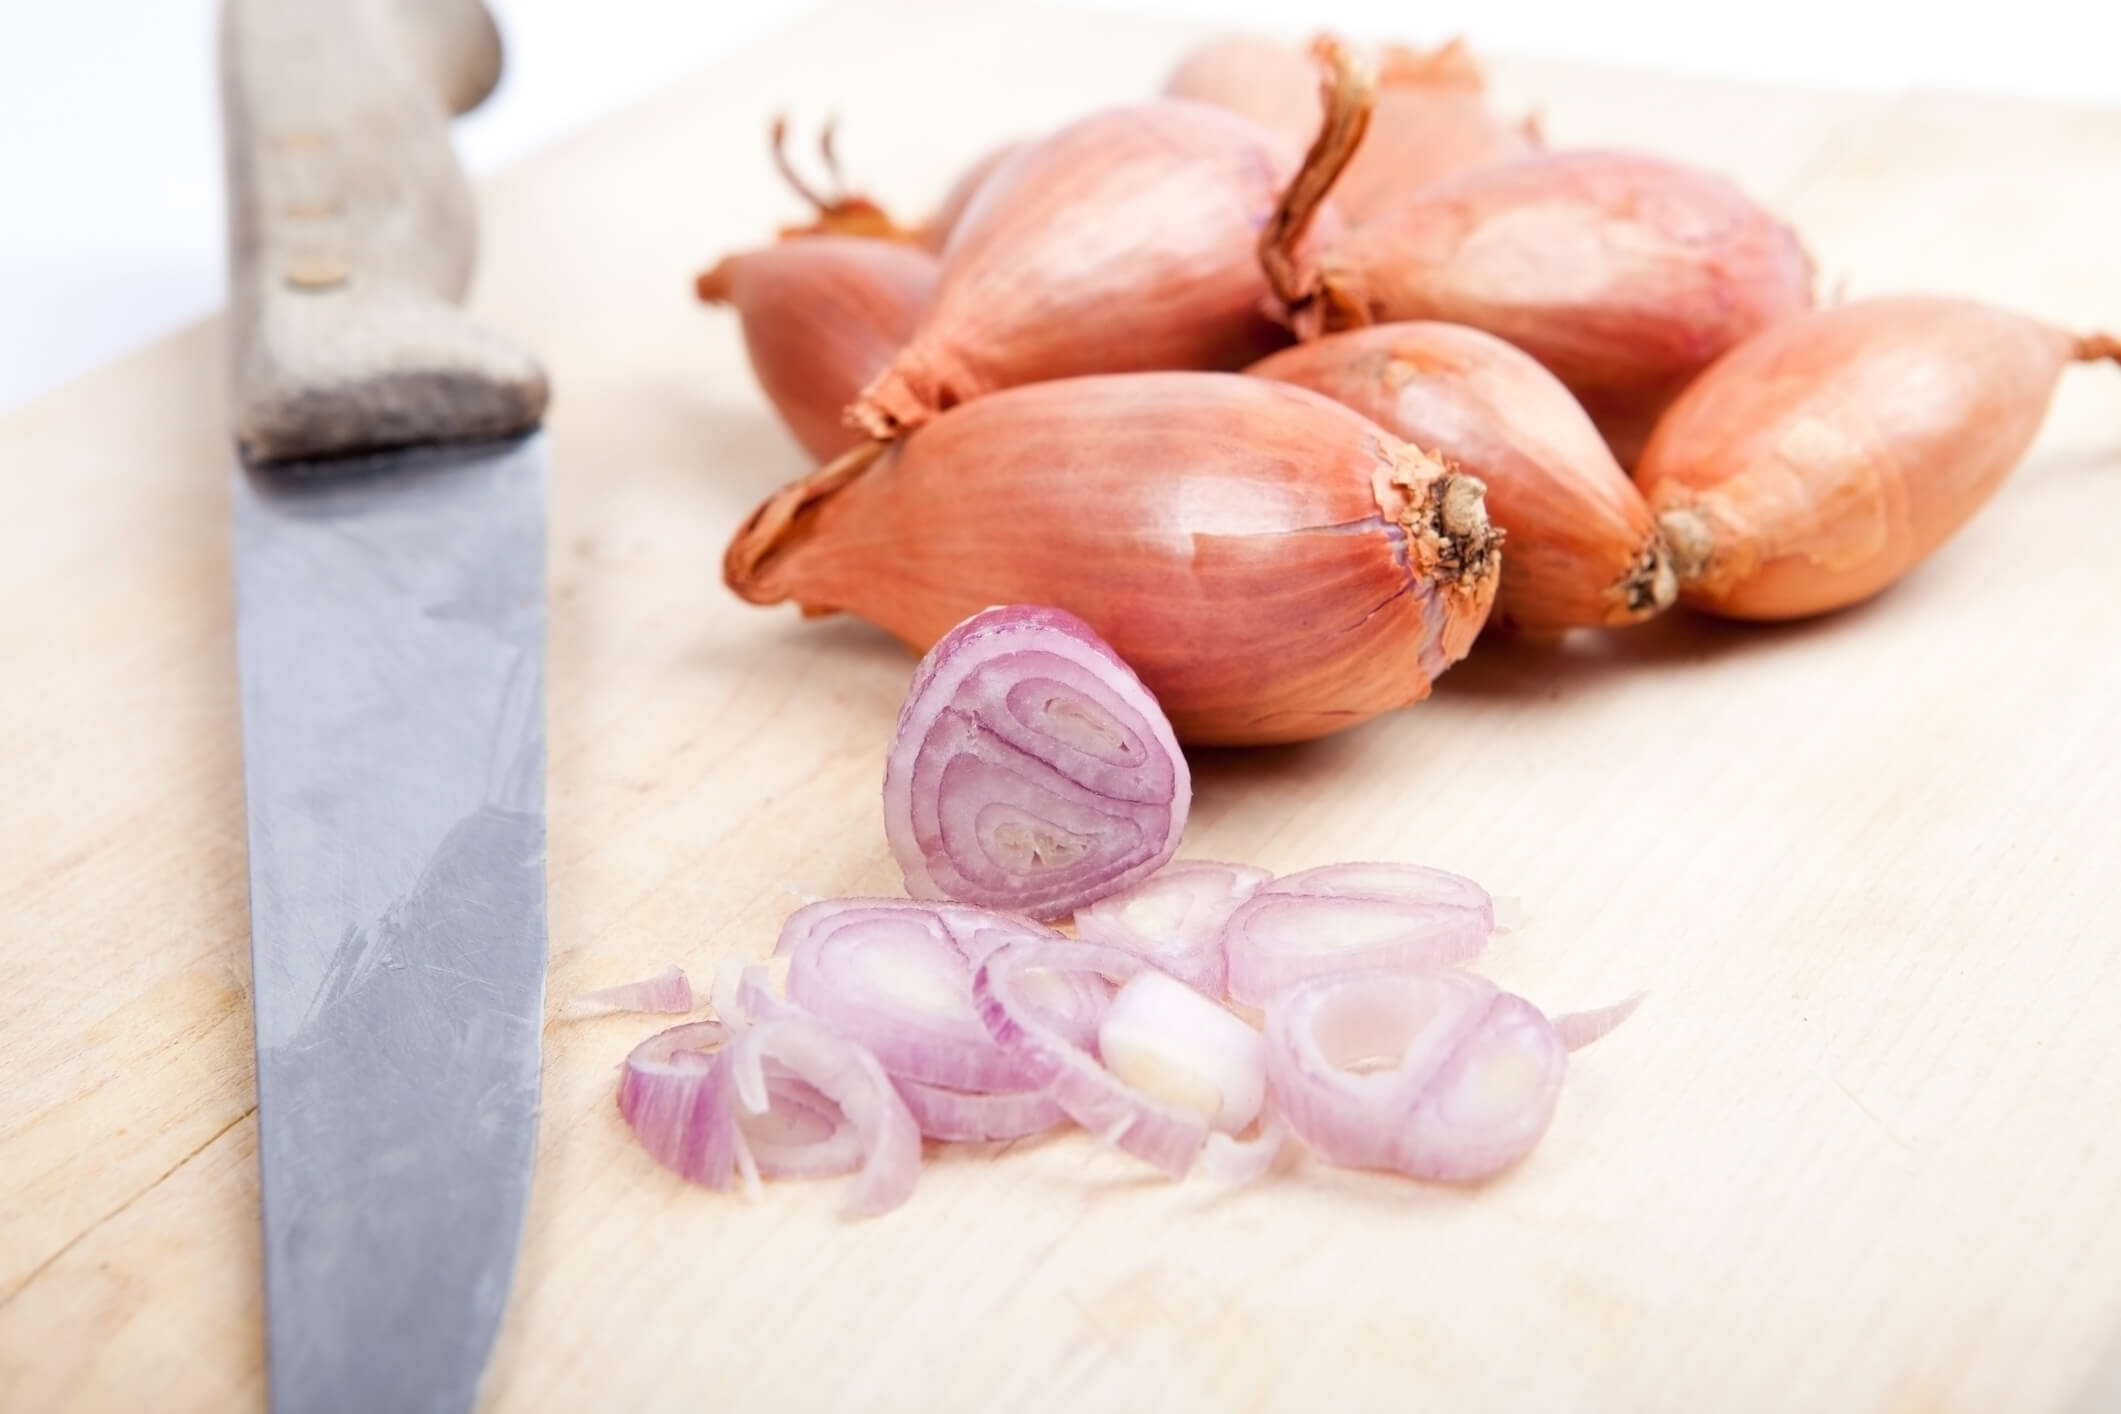 Thinly sliced shallots are the key to quick pickling.